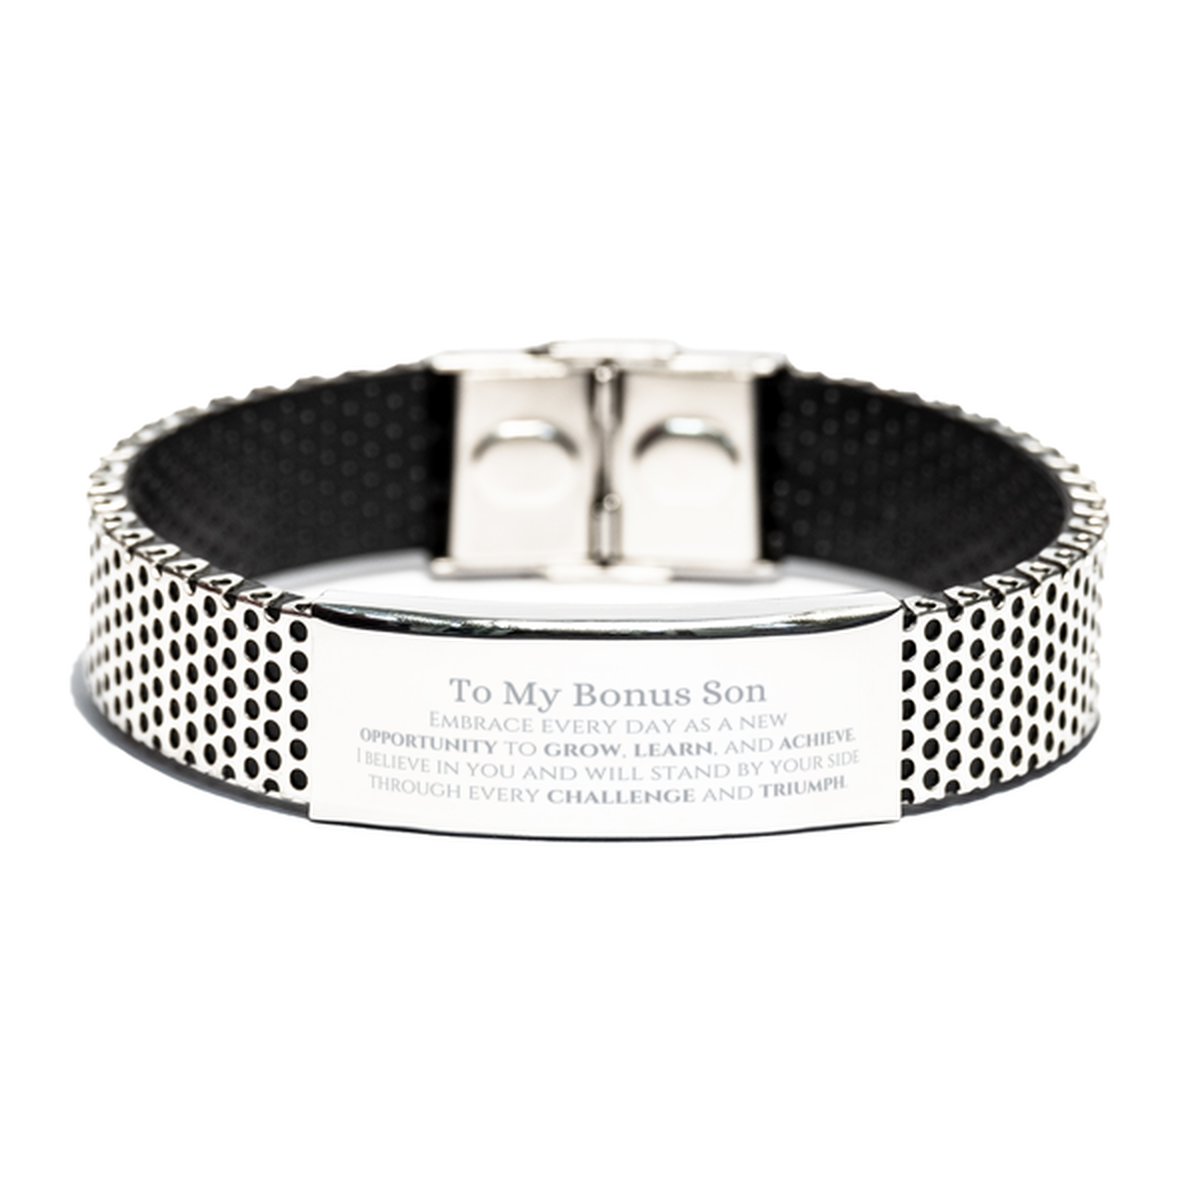 To My Bonus Son Gifts, I believe in you and will stand by your side, Inspirational Stainless Steel Bracelet For Bonus Son, Birthday Christmas Motivational Bonus Son Gifts